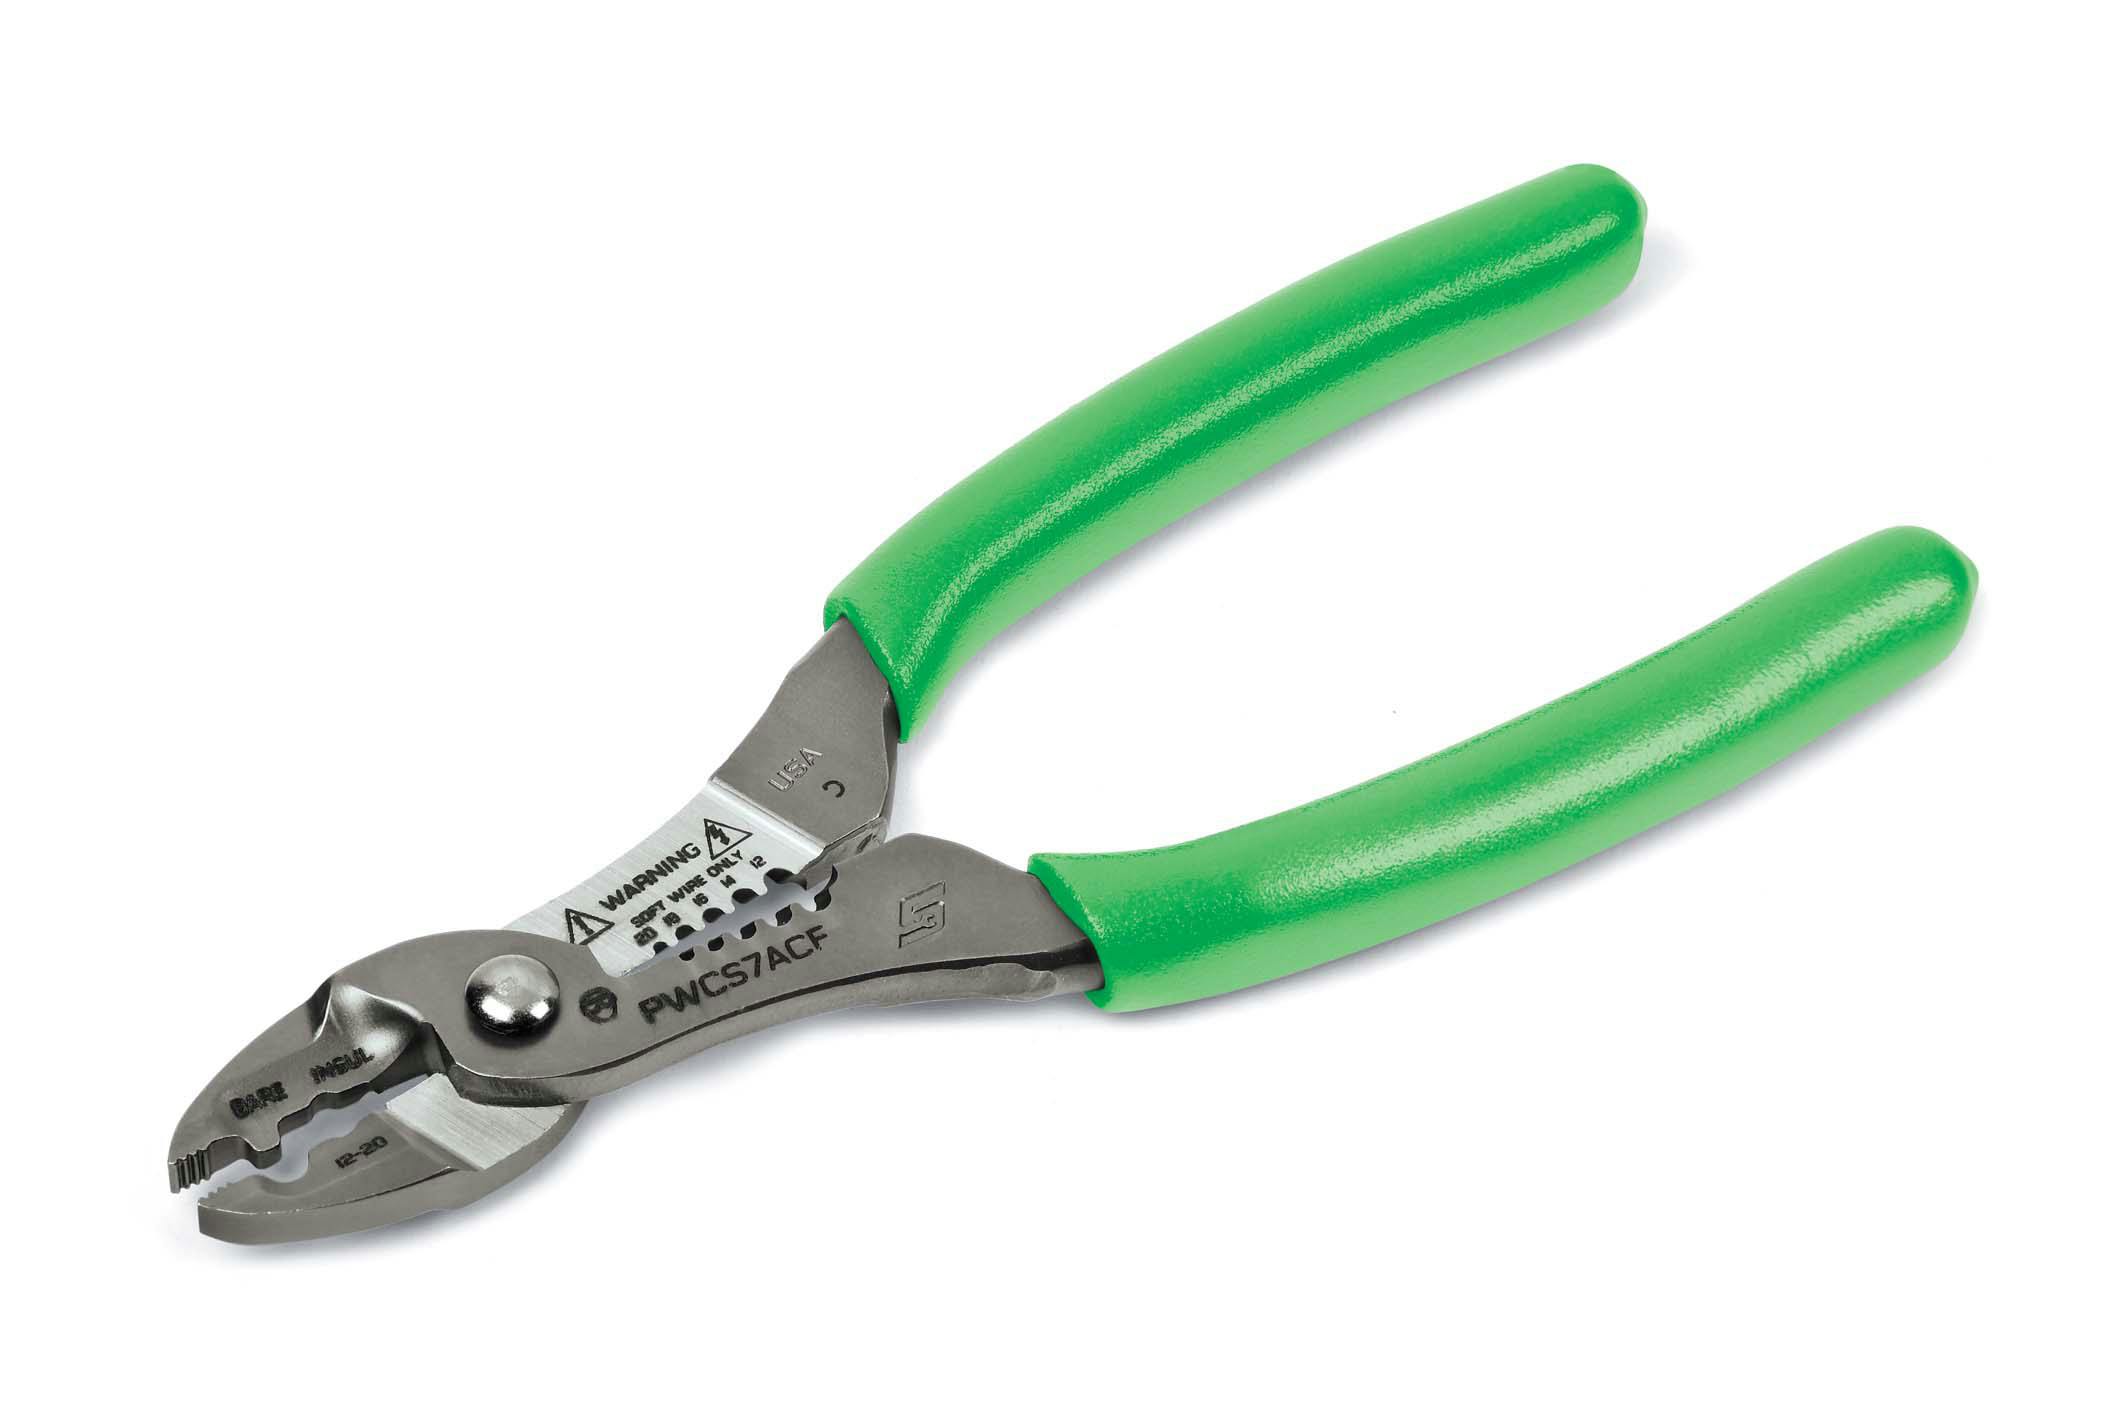 NEW Snap-On PWCS7ACF *Green* Wire Striper Crimper /Cutter 7" Free Shipping!!! 